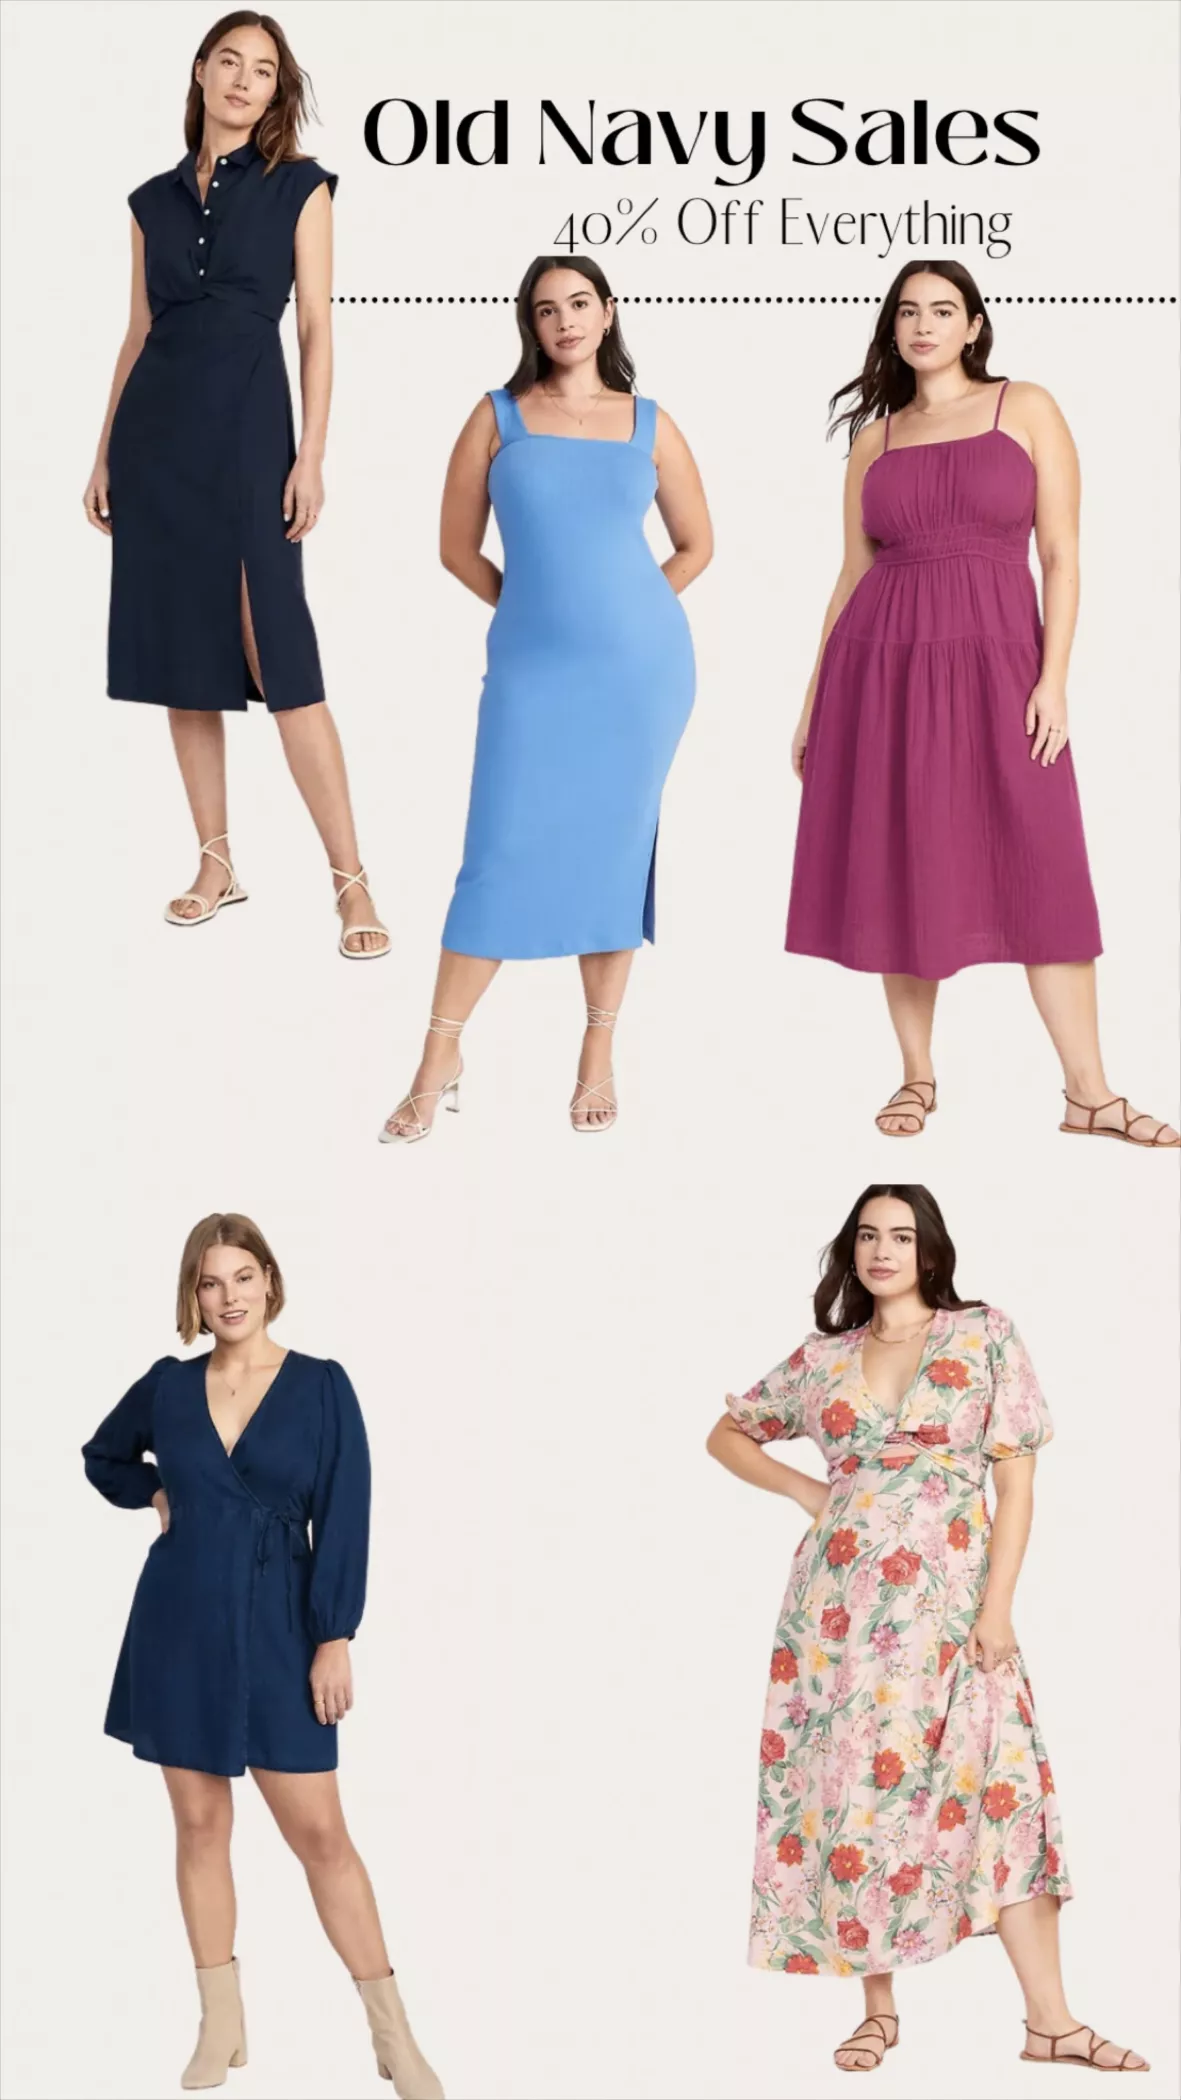 Style Insider Sinead's Curvy Style talks body celebration and how to dress  for your shape - RSVP Live